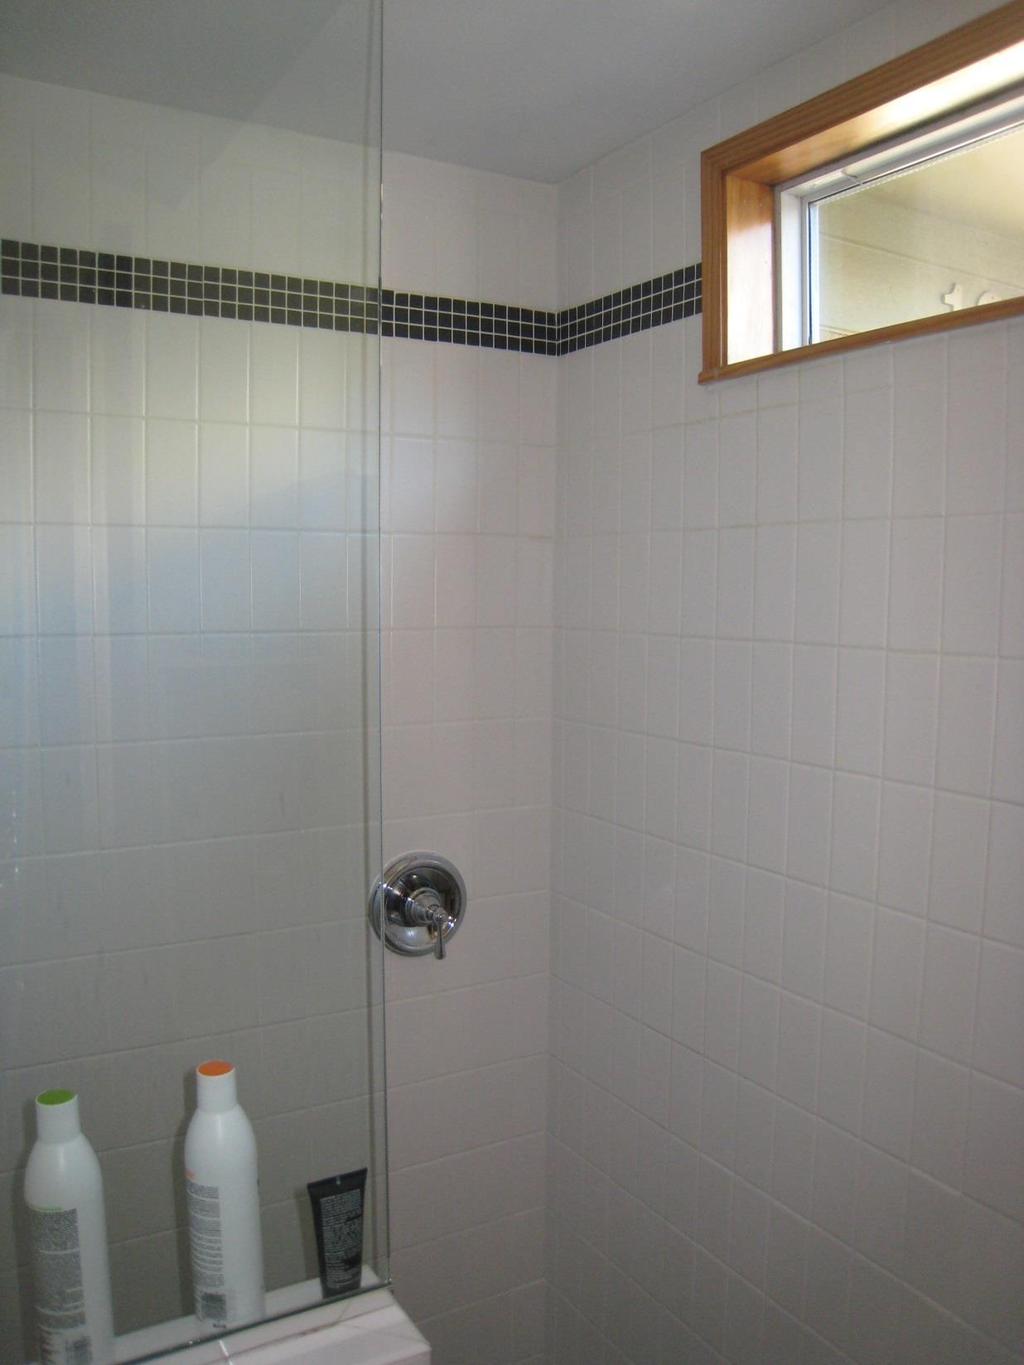 The client liked having the shower controls separate from the